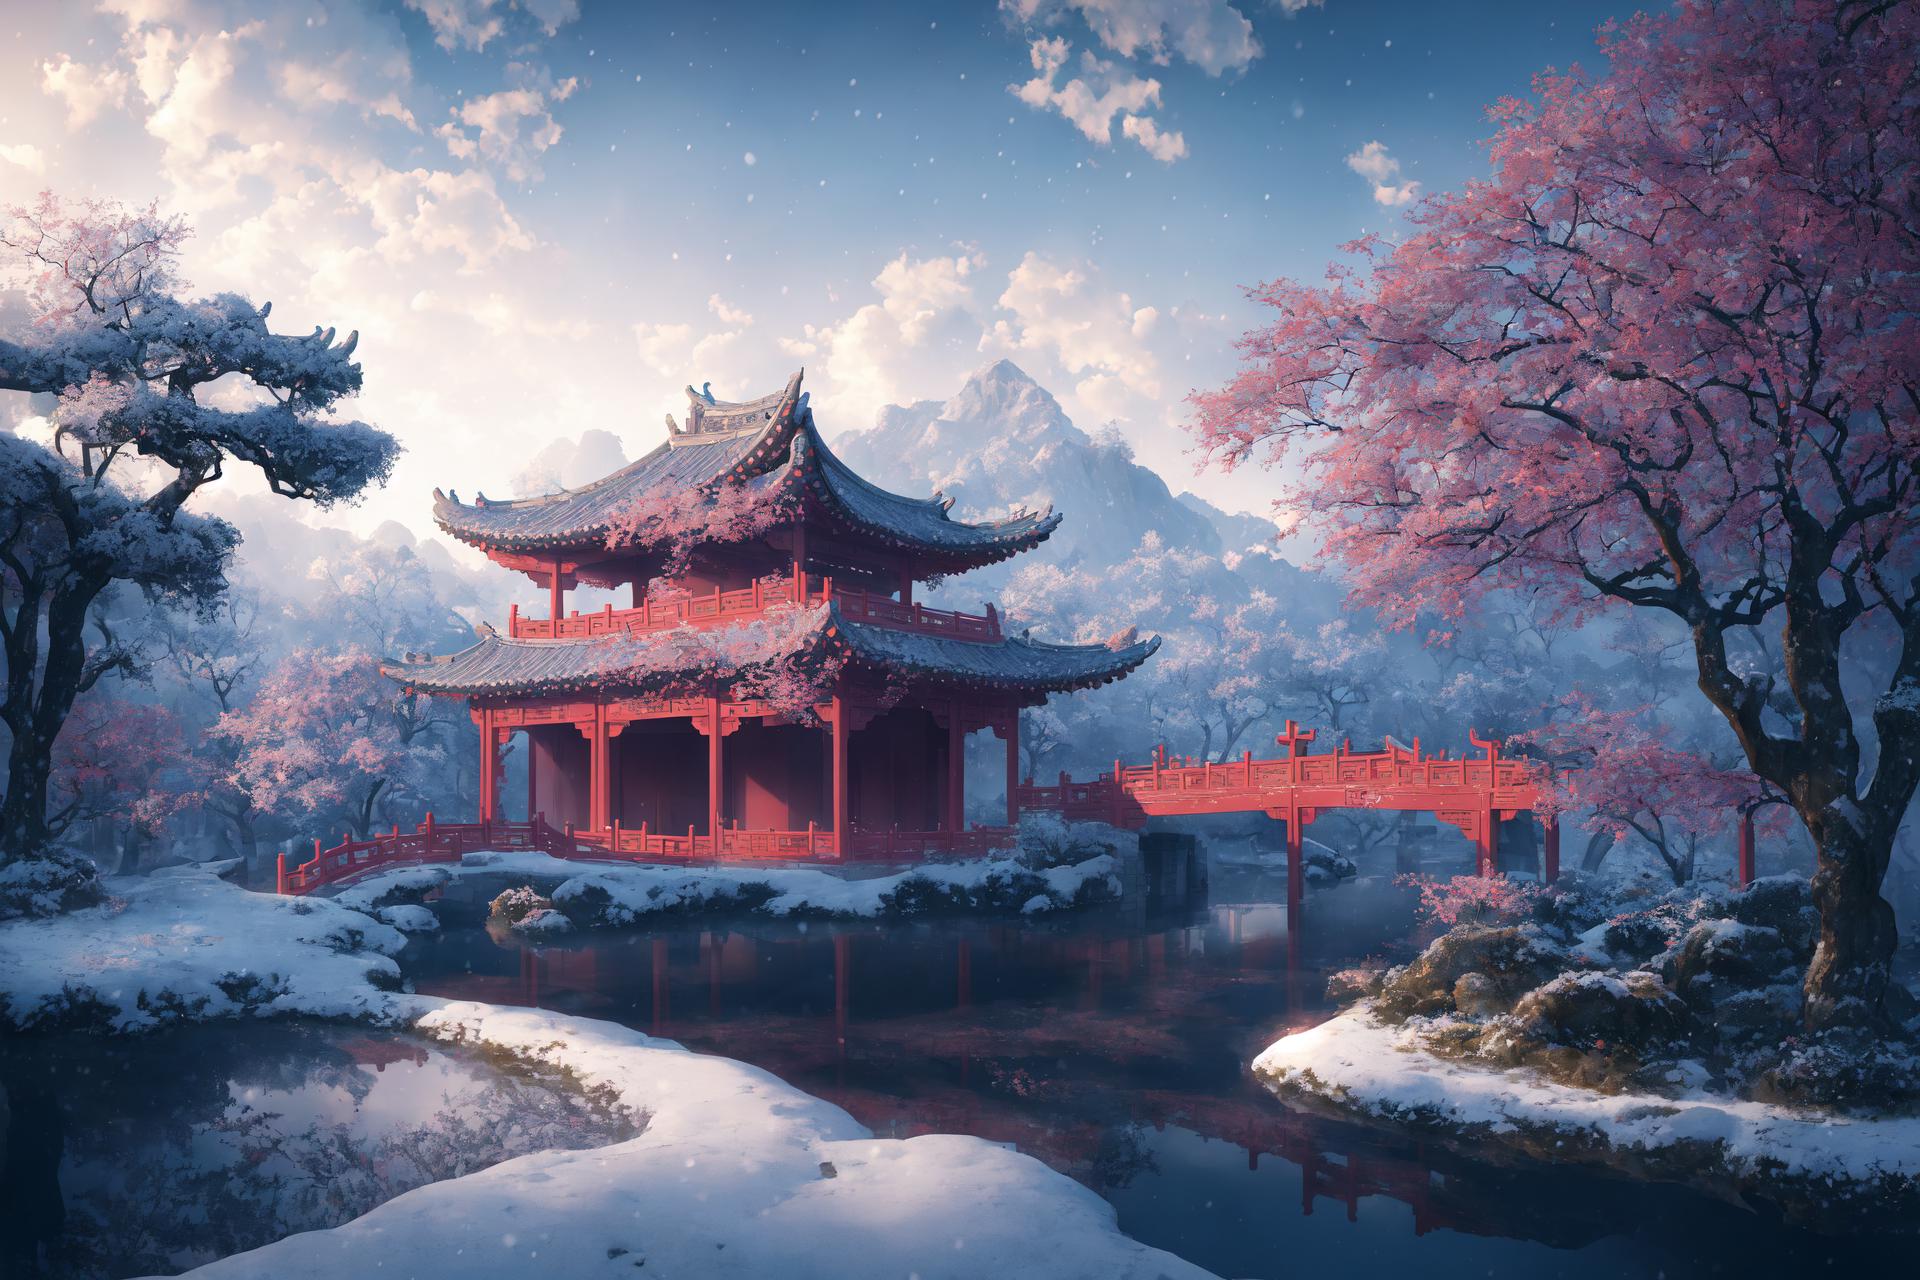 A beautiful painting of a red pagoda with snowy mountains in the background.